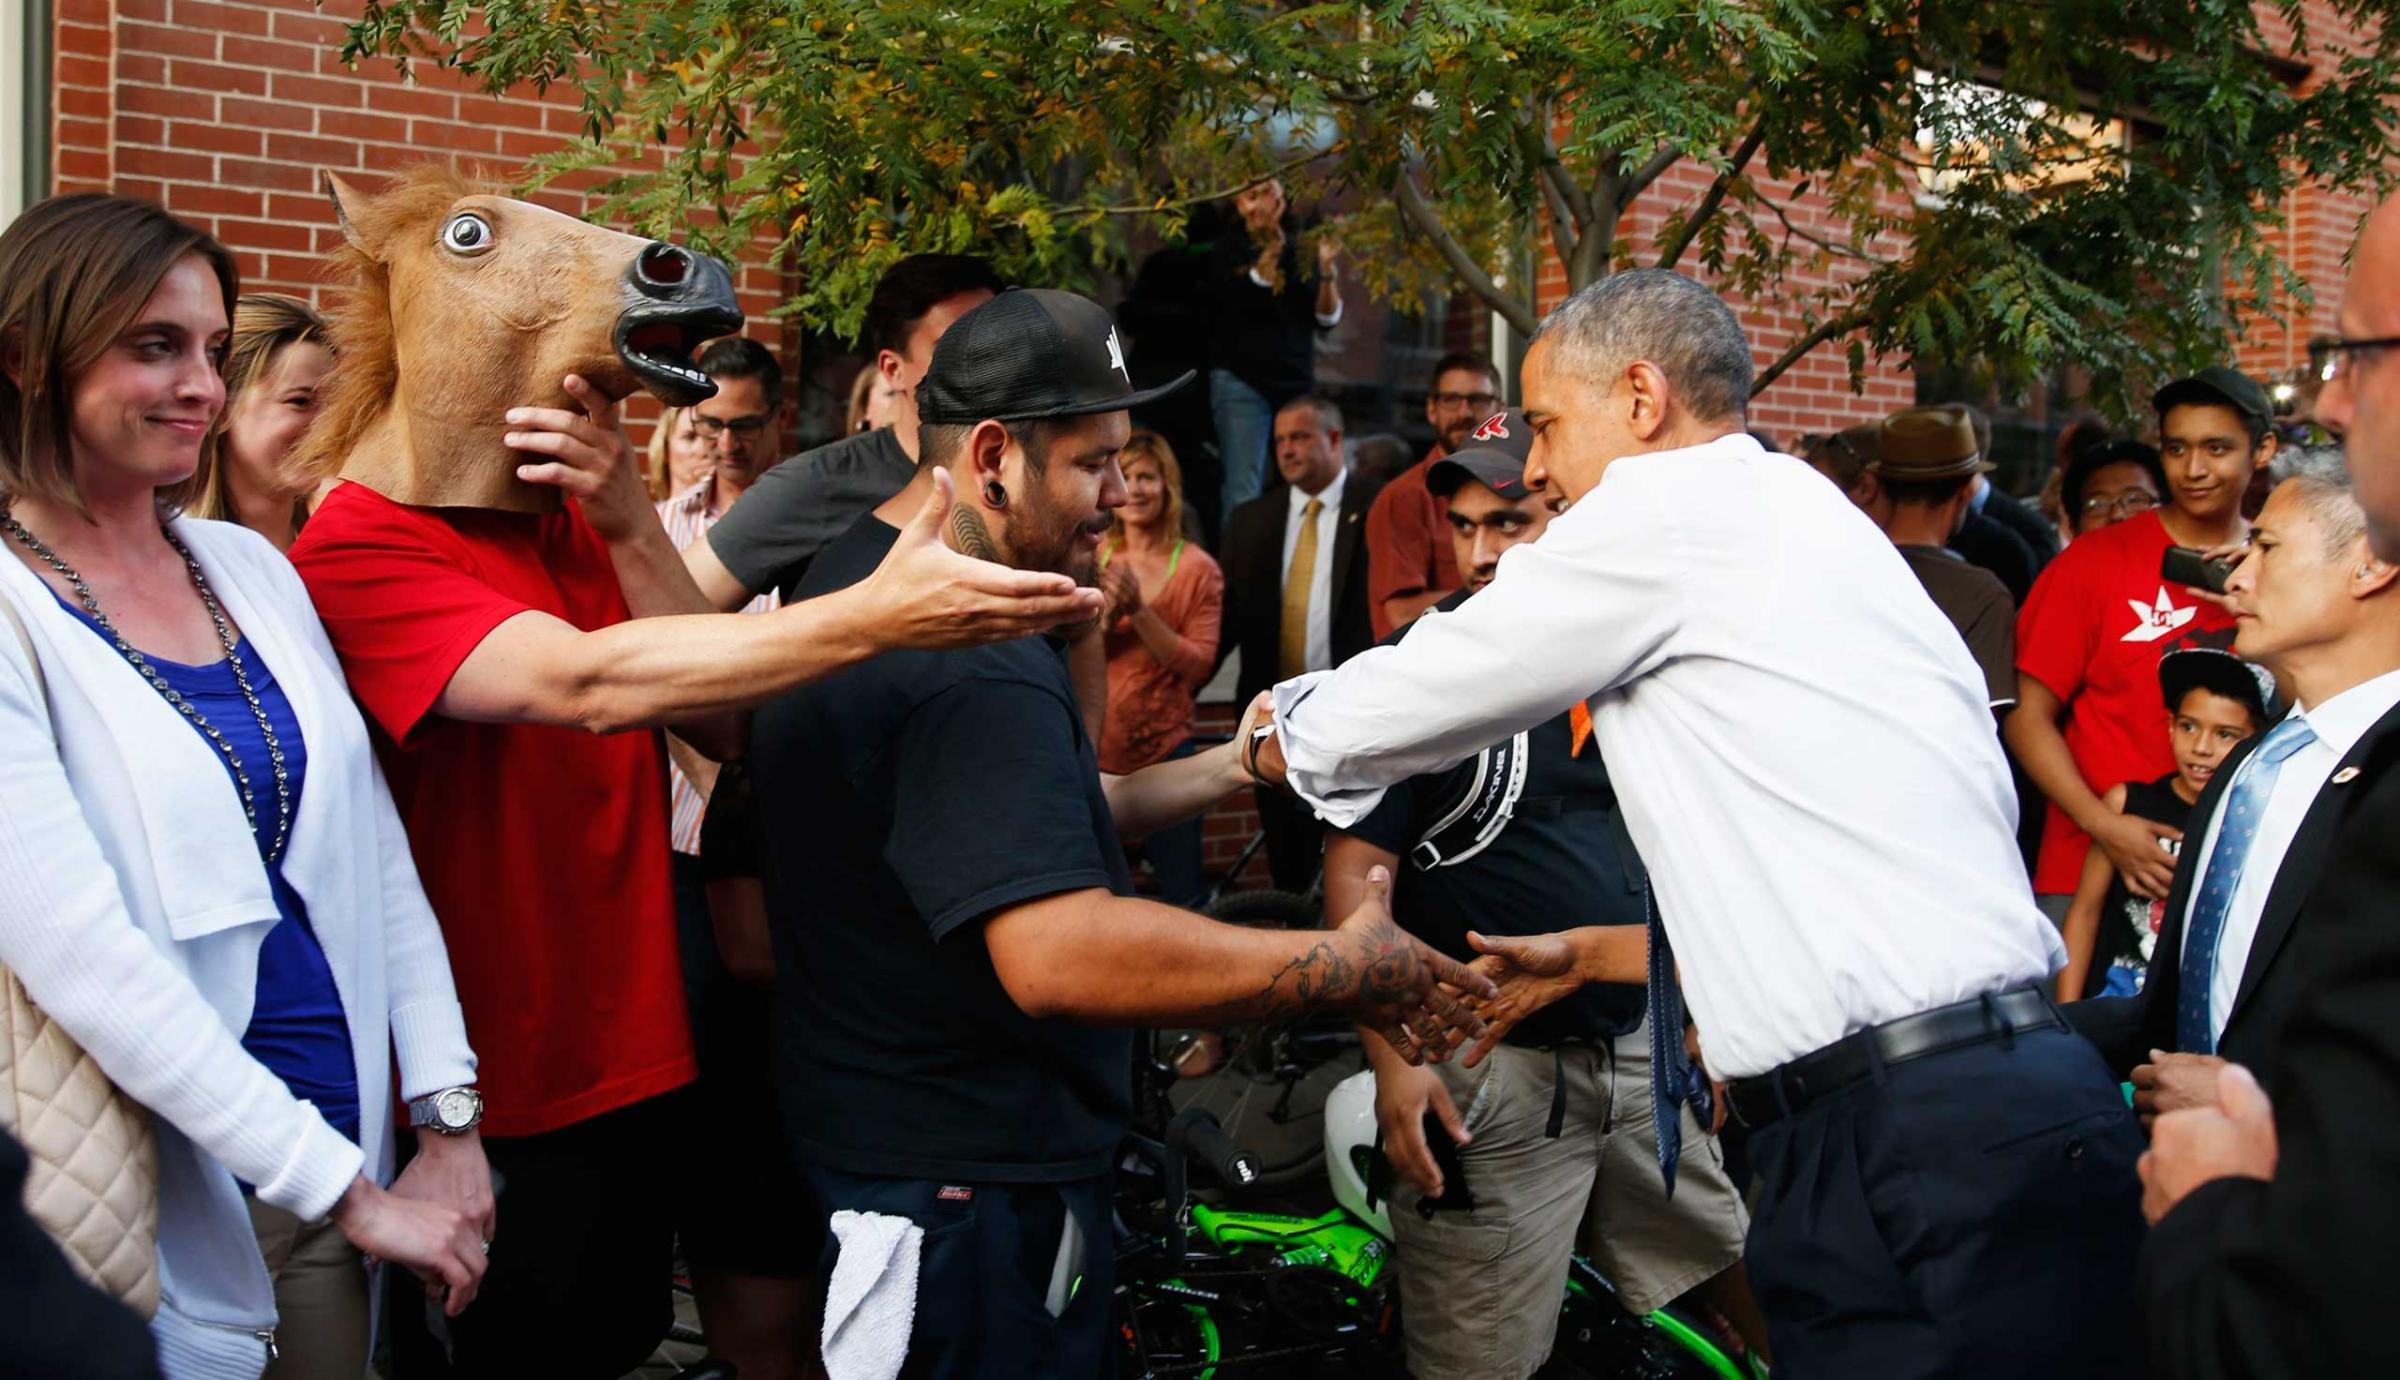 A man wearing a horse mask reaches out to shake hands with U.S. President Barack Obama during a walkabout in Denver July 8, 2014.